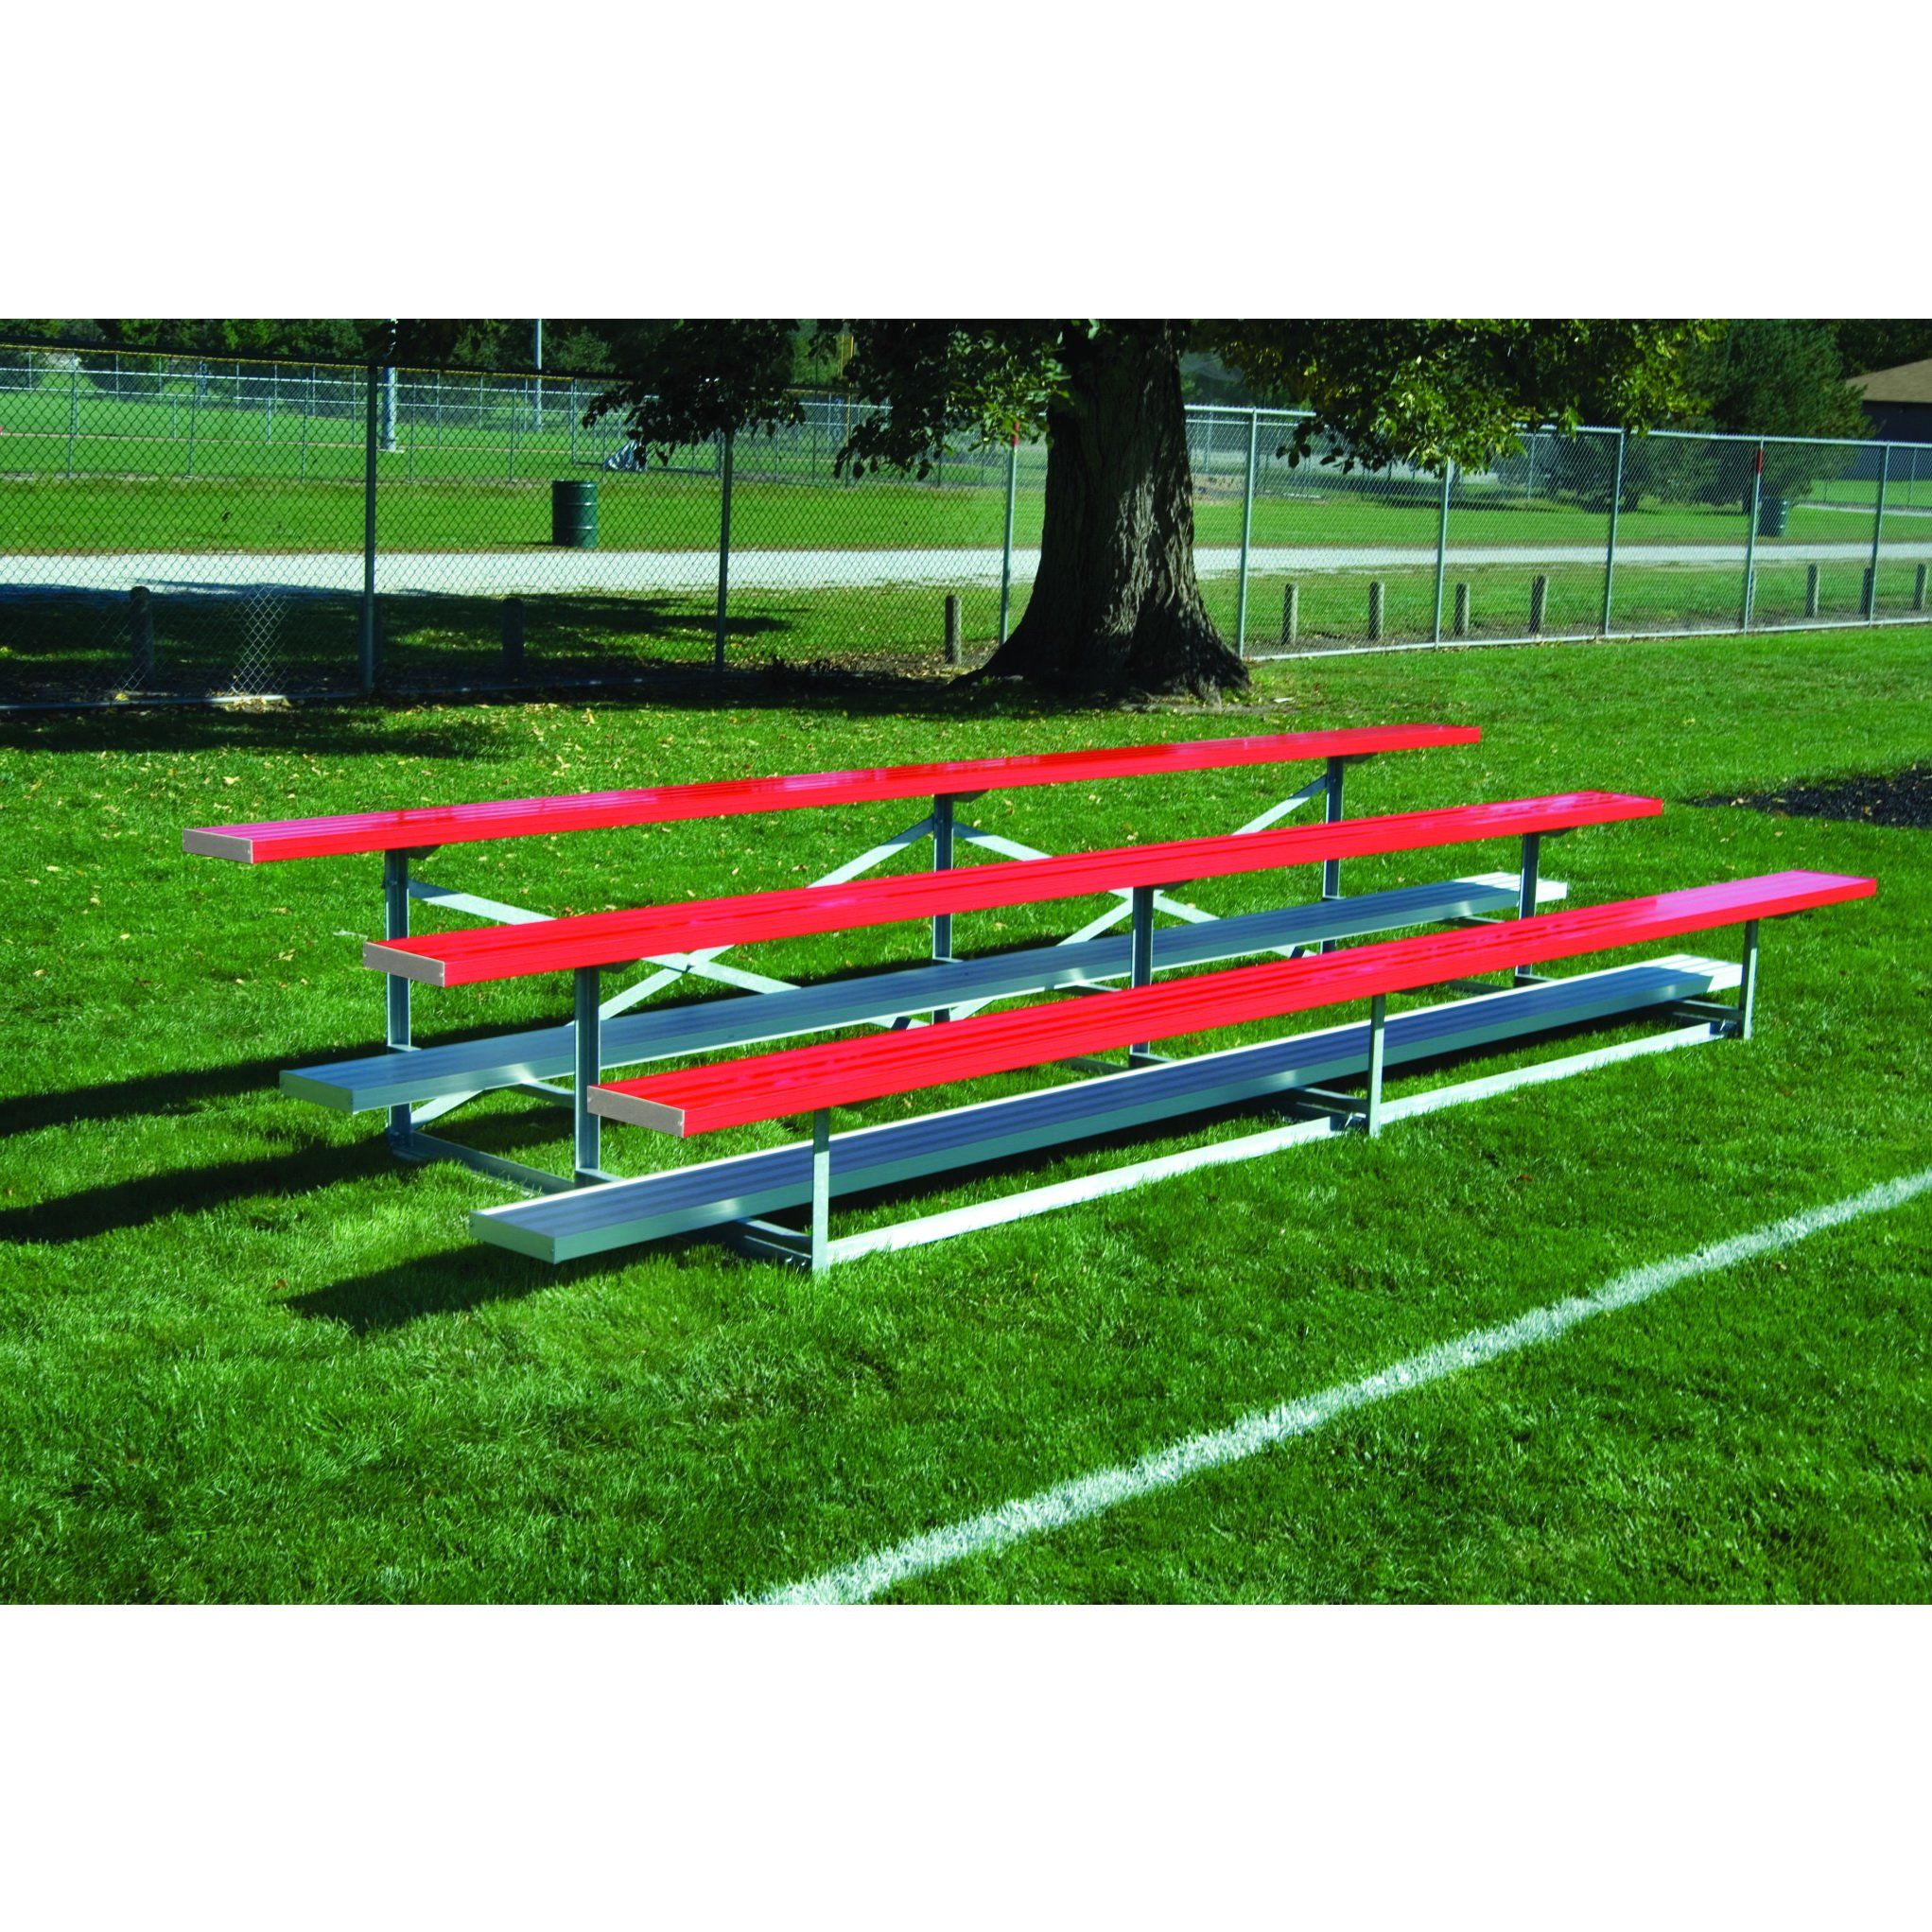 Bison Standard Steel Structure Portable Outdoor Bleachers - Pitch Pro Direct